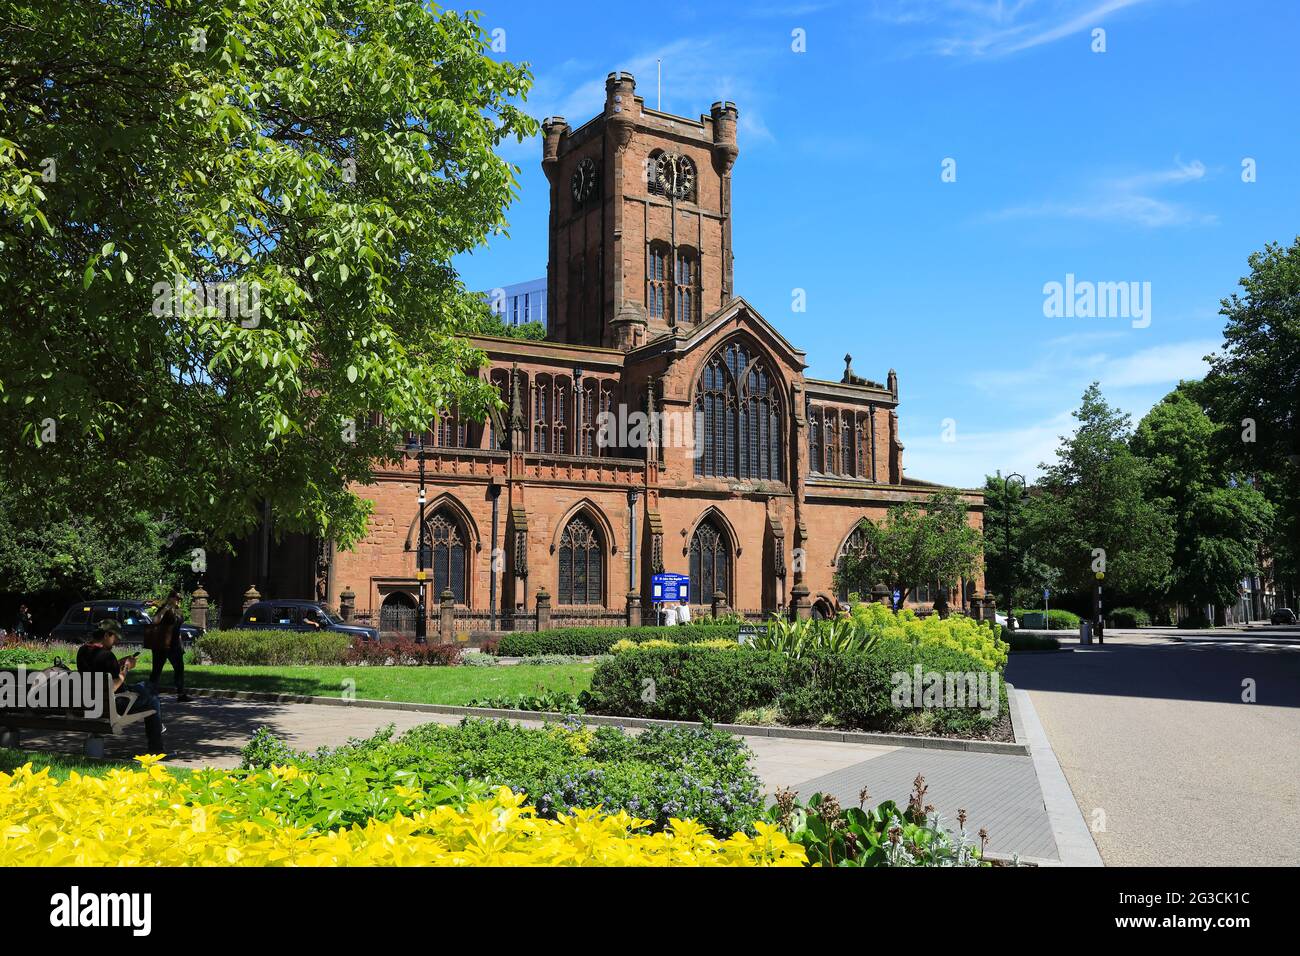 The Collegiate & Parish church of St John the Baptist, on Fleet St, located in the medieval area of Spon Street, in Coventry city centre, UK Stock Photo